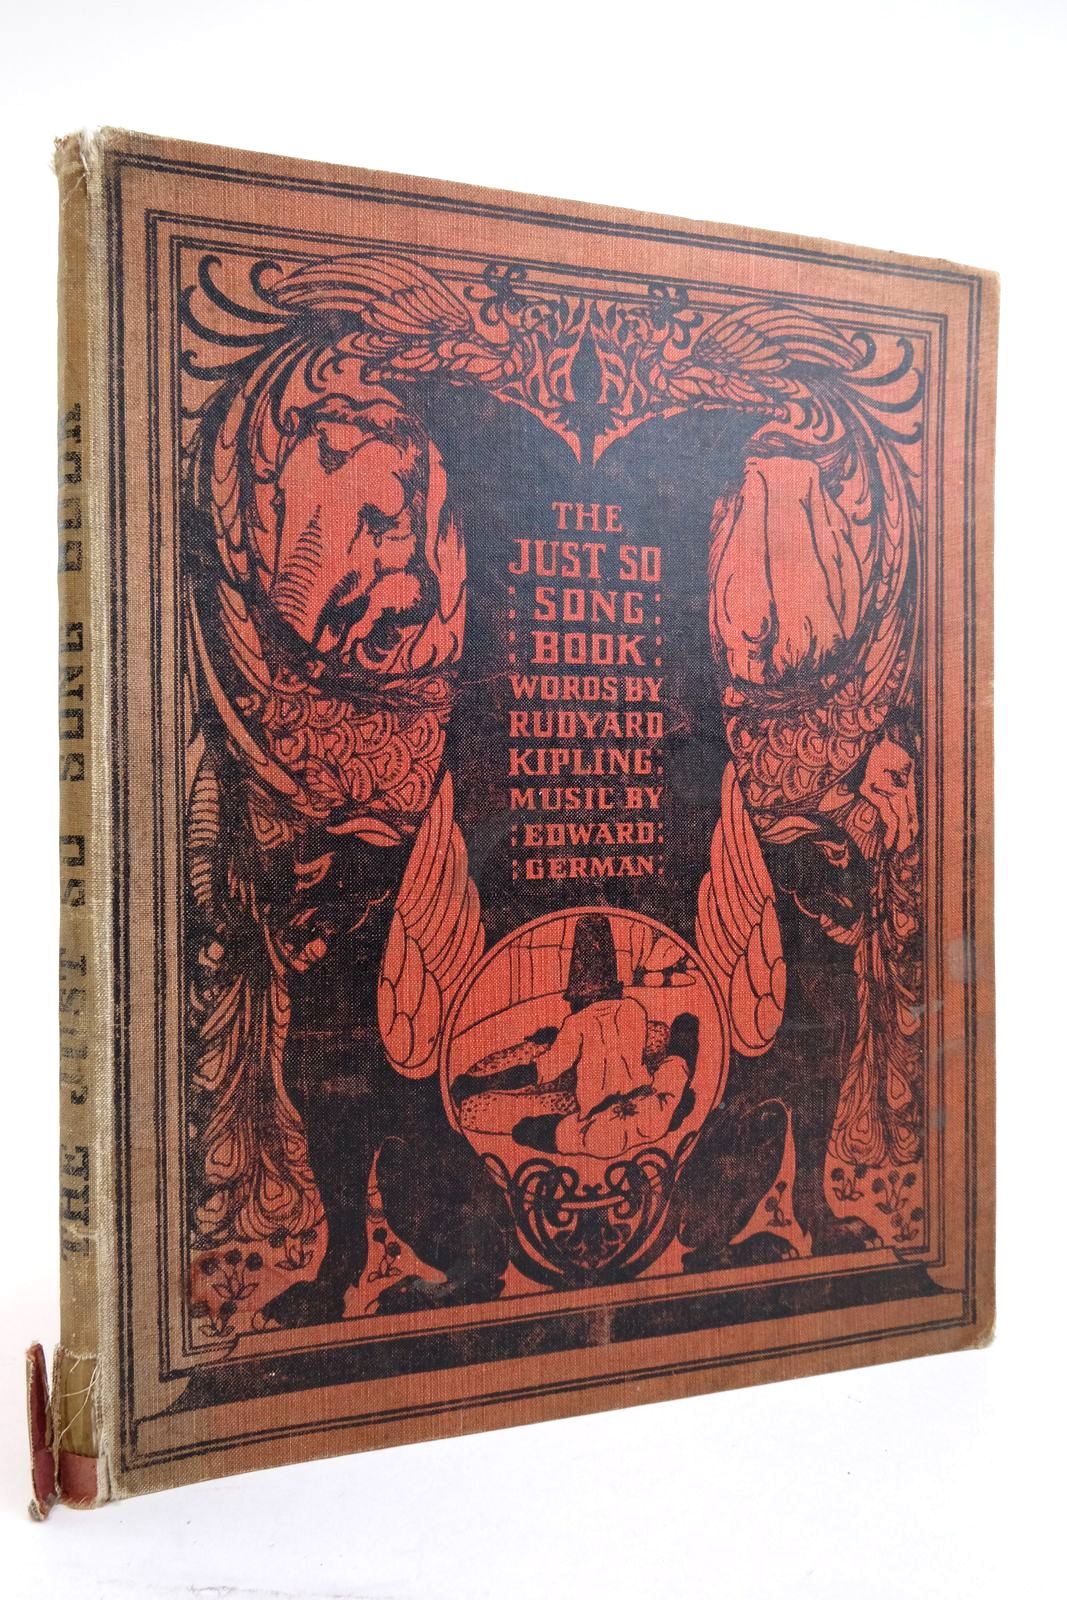 Photo of THE JUST SO SONG BOOK written by Kipling, Rudyard
German, Edward published by Macmillan & Co. Ltd. (STOCK CODE: 2135894)  for sale by Stella & Rose's Books